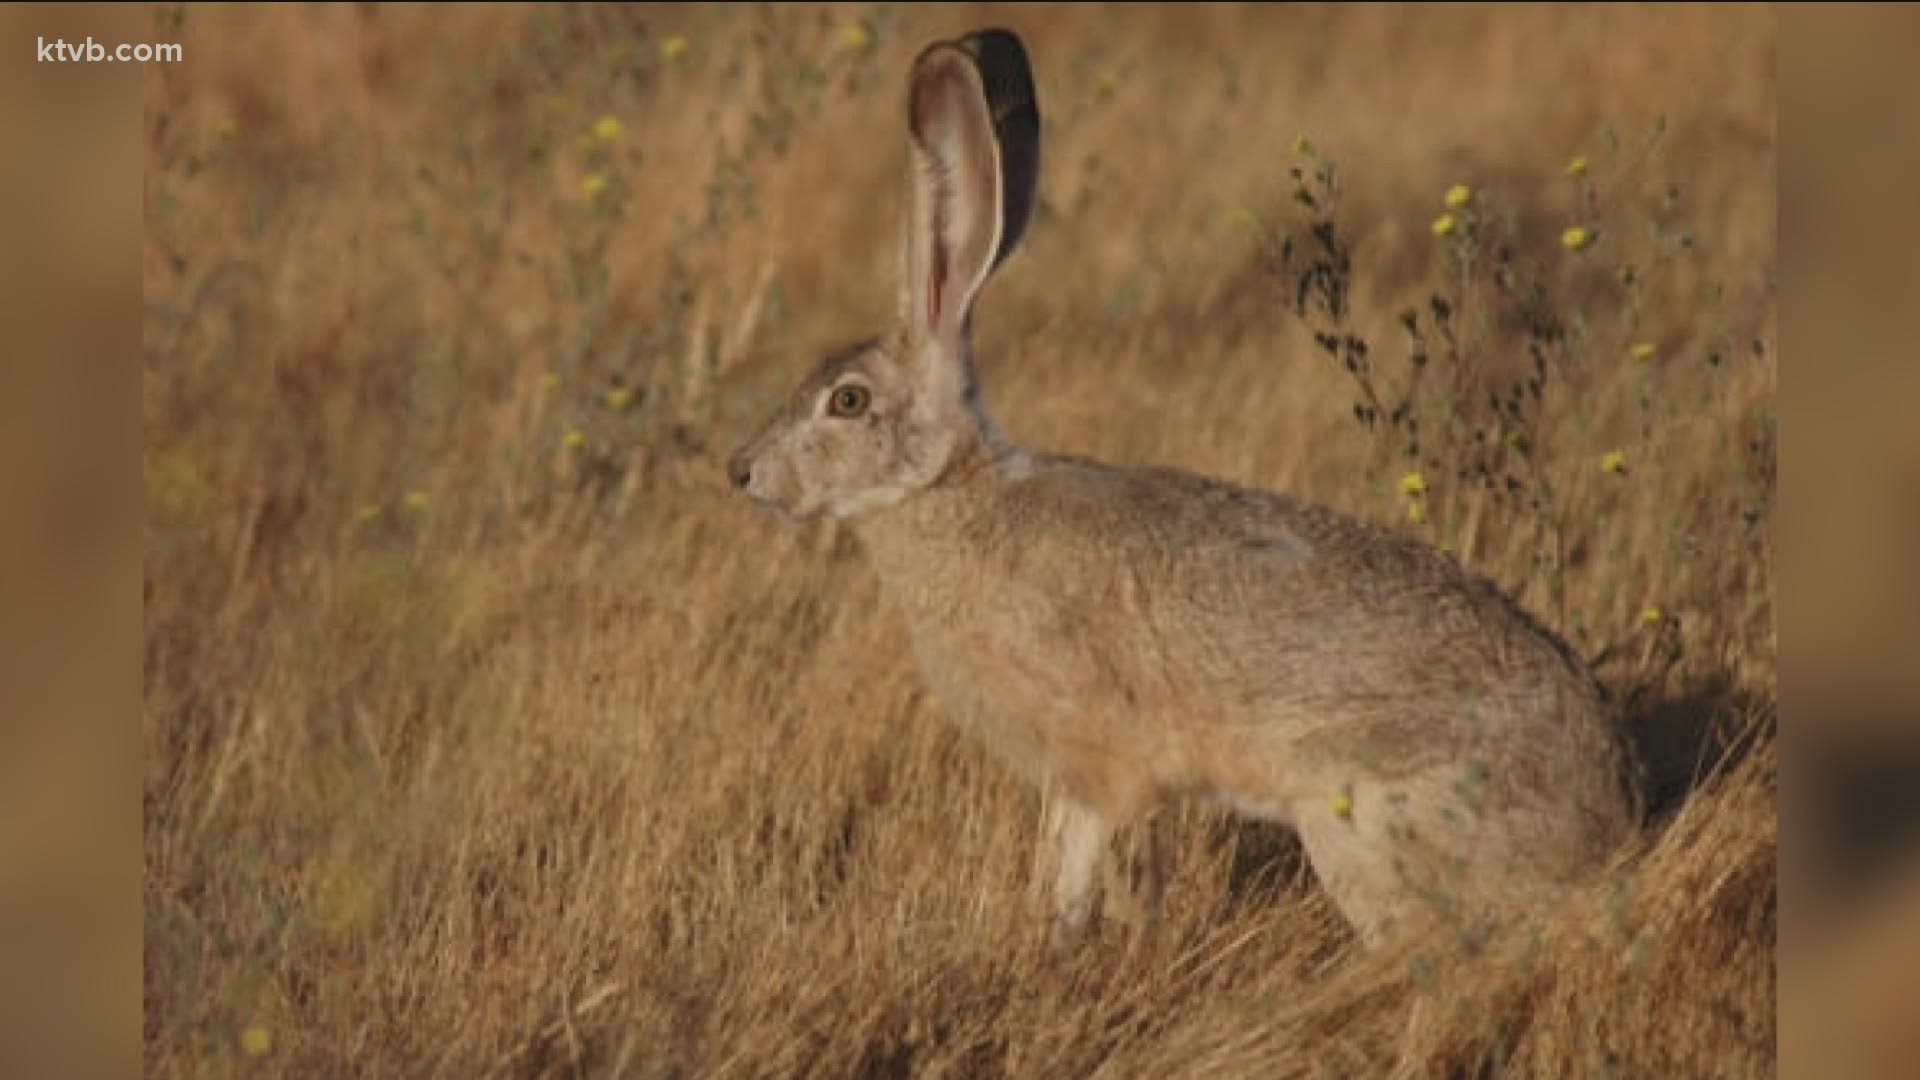 Idaho Fish and Game says two jackrabbits with a highly contagious and deadly disease were found near the Boise Airport.